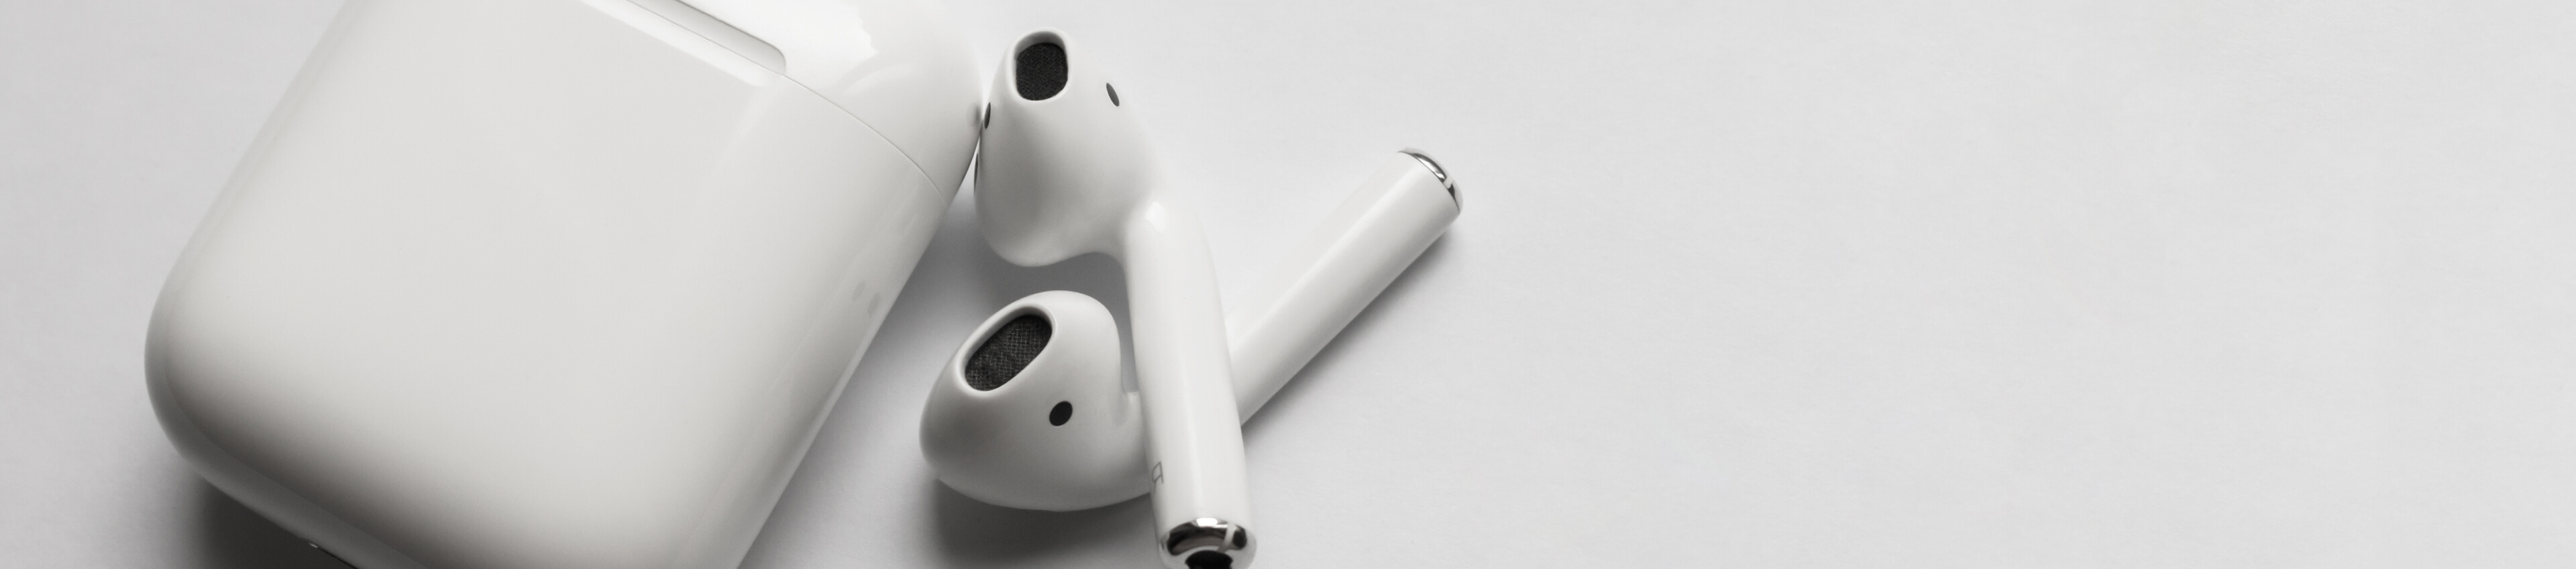 AirPods Black Friday 2021 SALE → Bekijk alle Deals & Kortingen - What Price Will Airpods Be On Black Friday